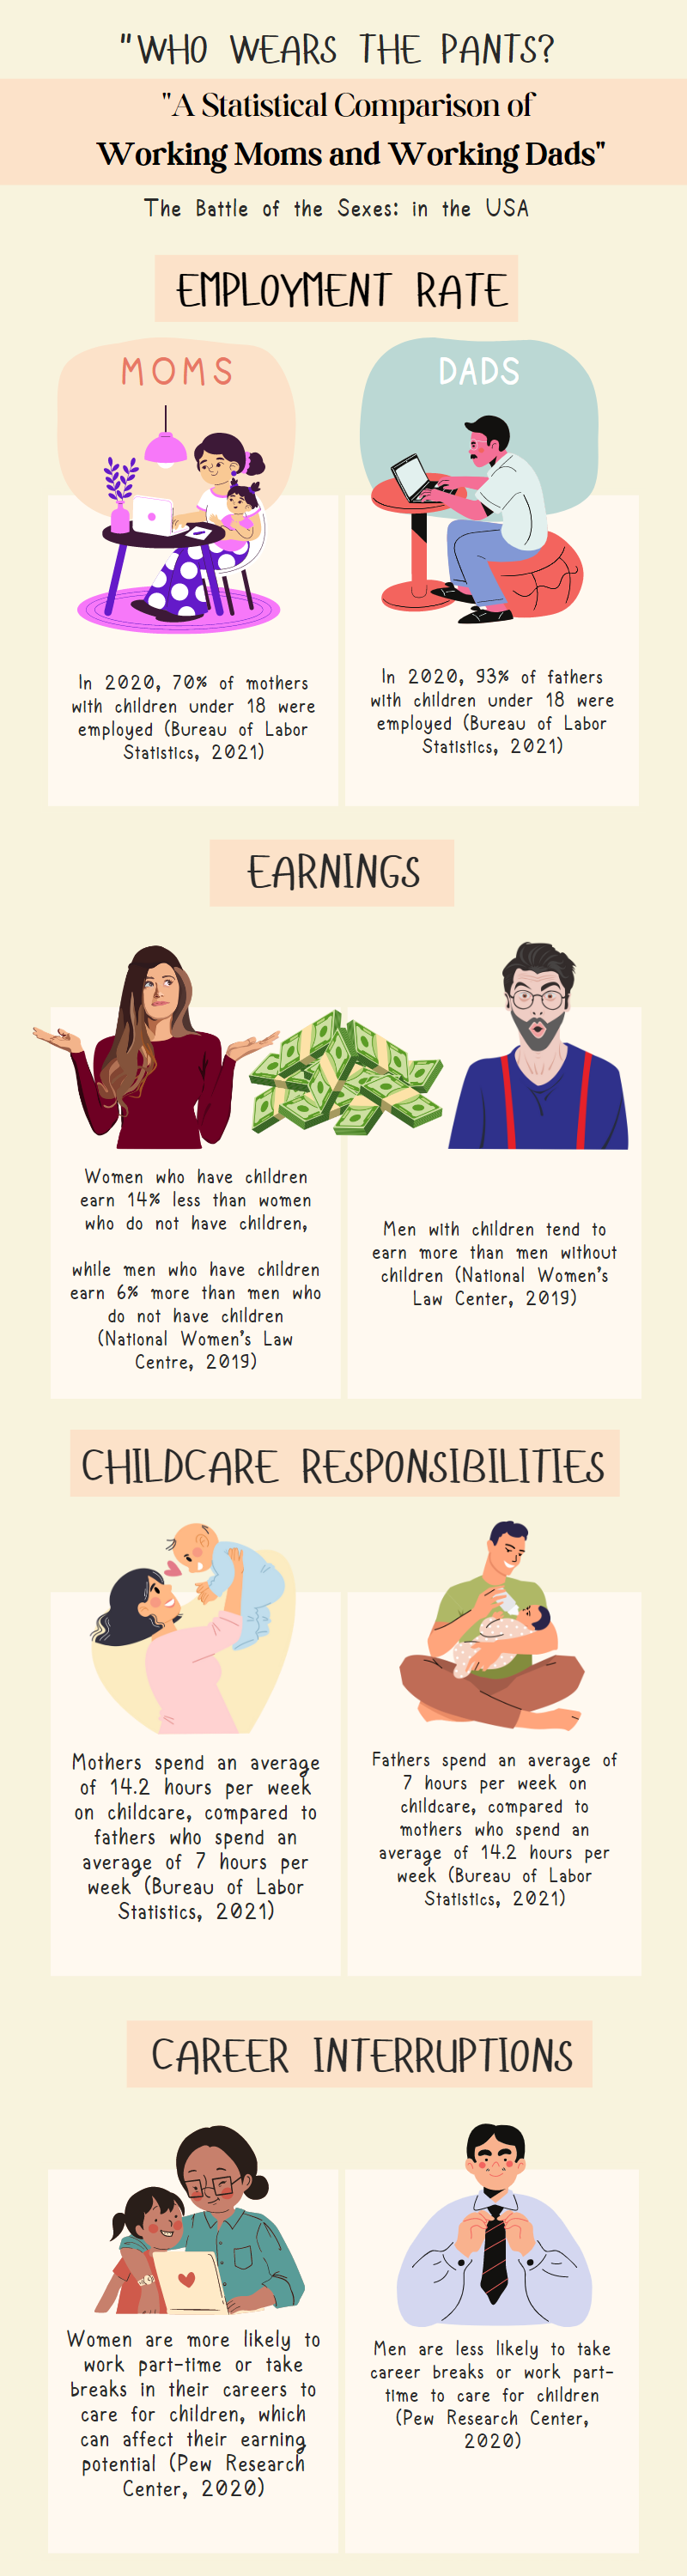 Infographic on the disparities between working mothers and fathers, featuring statistics and facts on employment, earnings, caregiving responsibilities, and workplace discrimination.